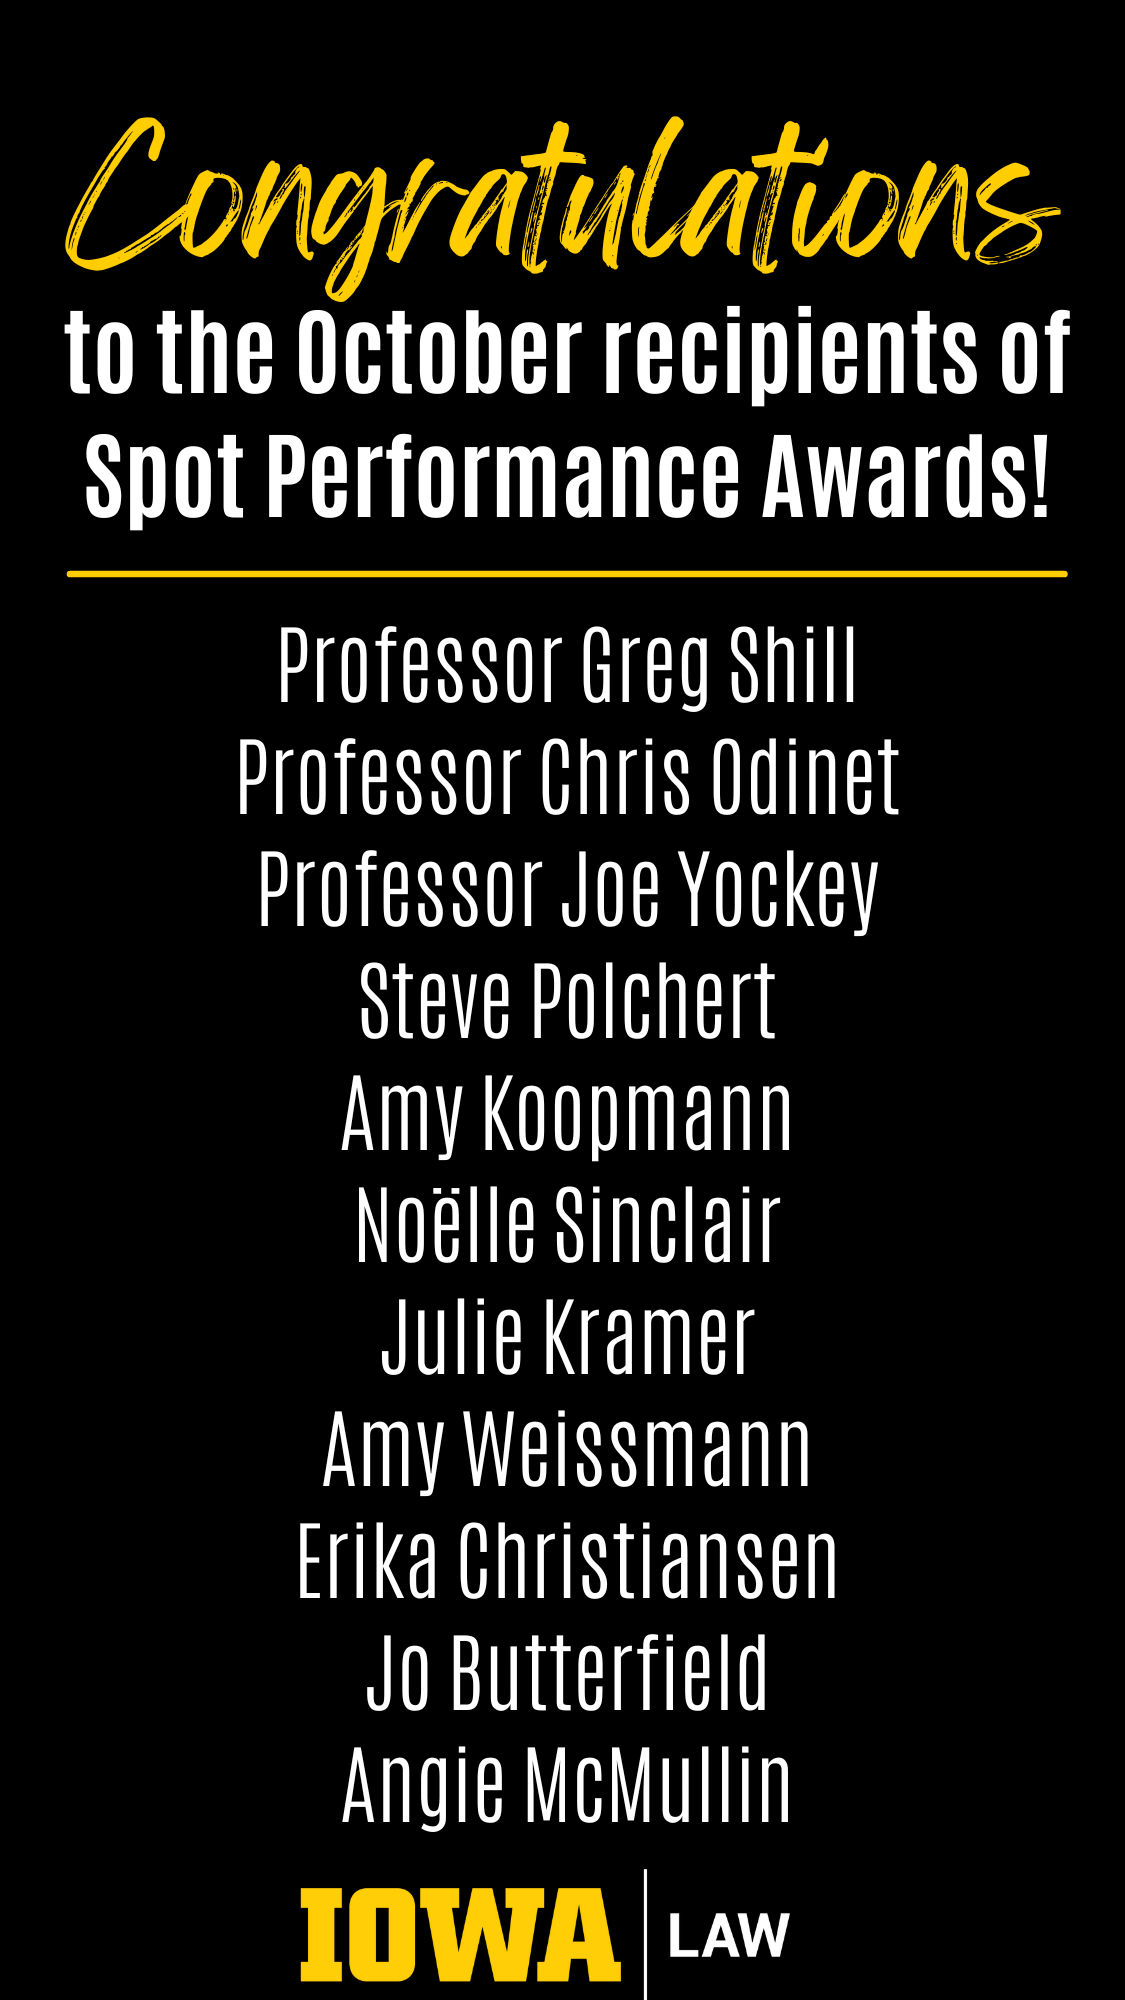 Congratulations to the October recipients of Spot Performance Awards!